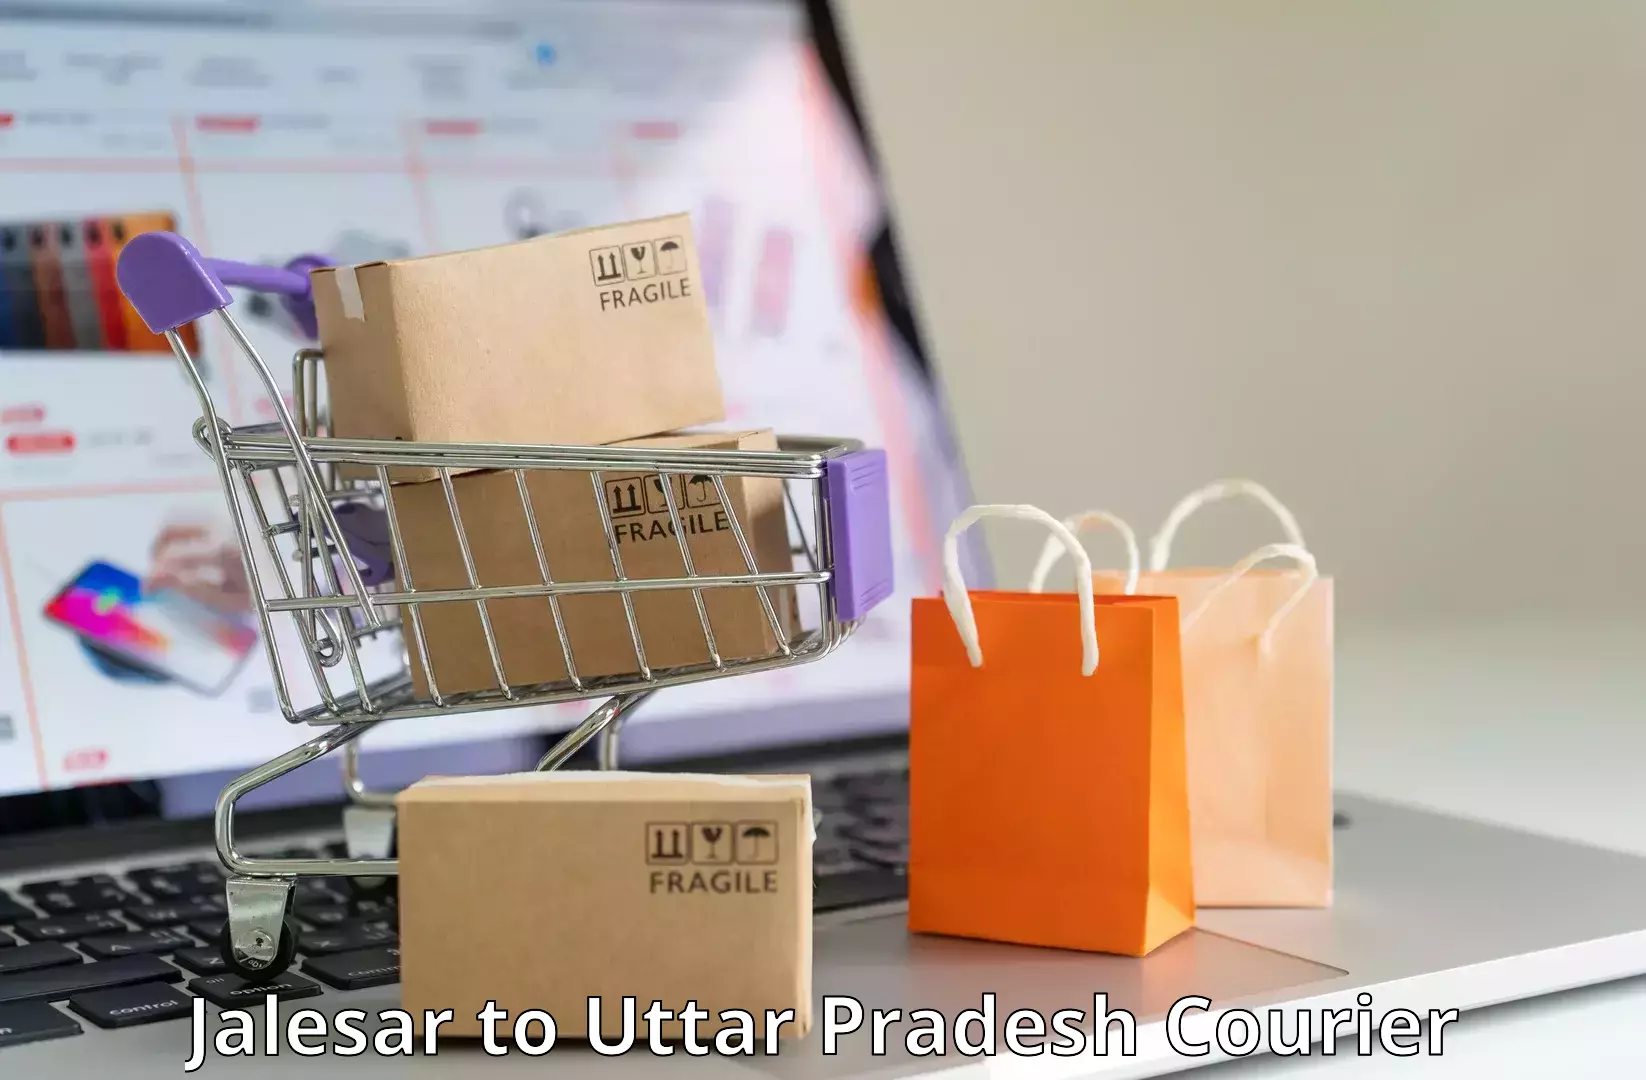 Cost-effective courier options Jalesar to Mughalsarai